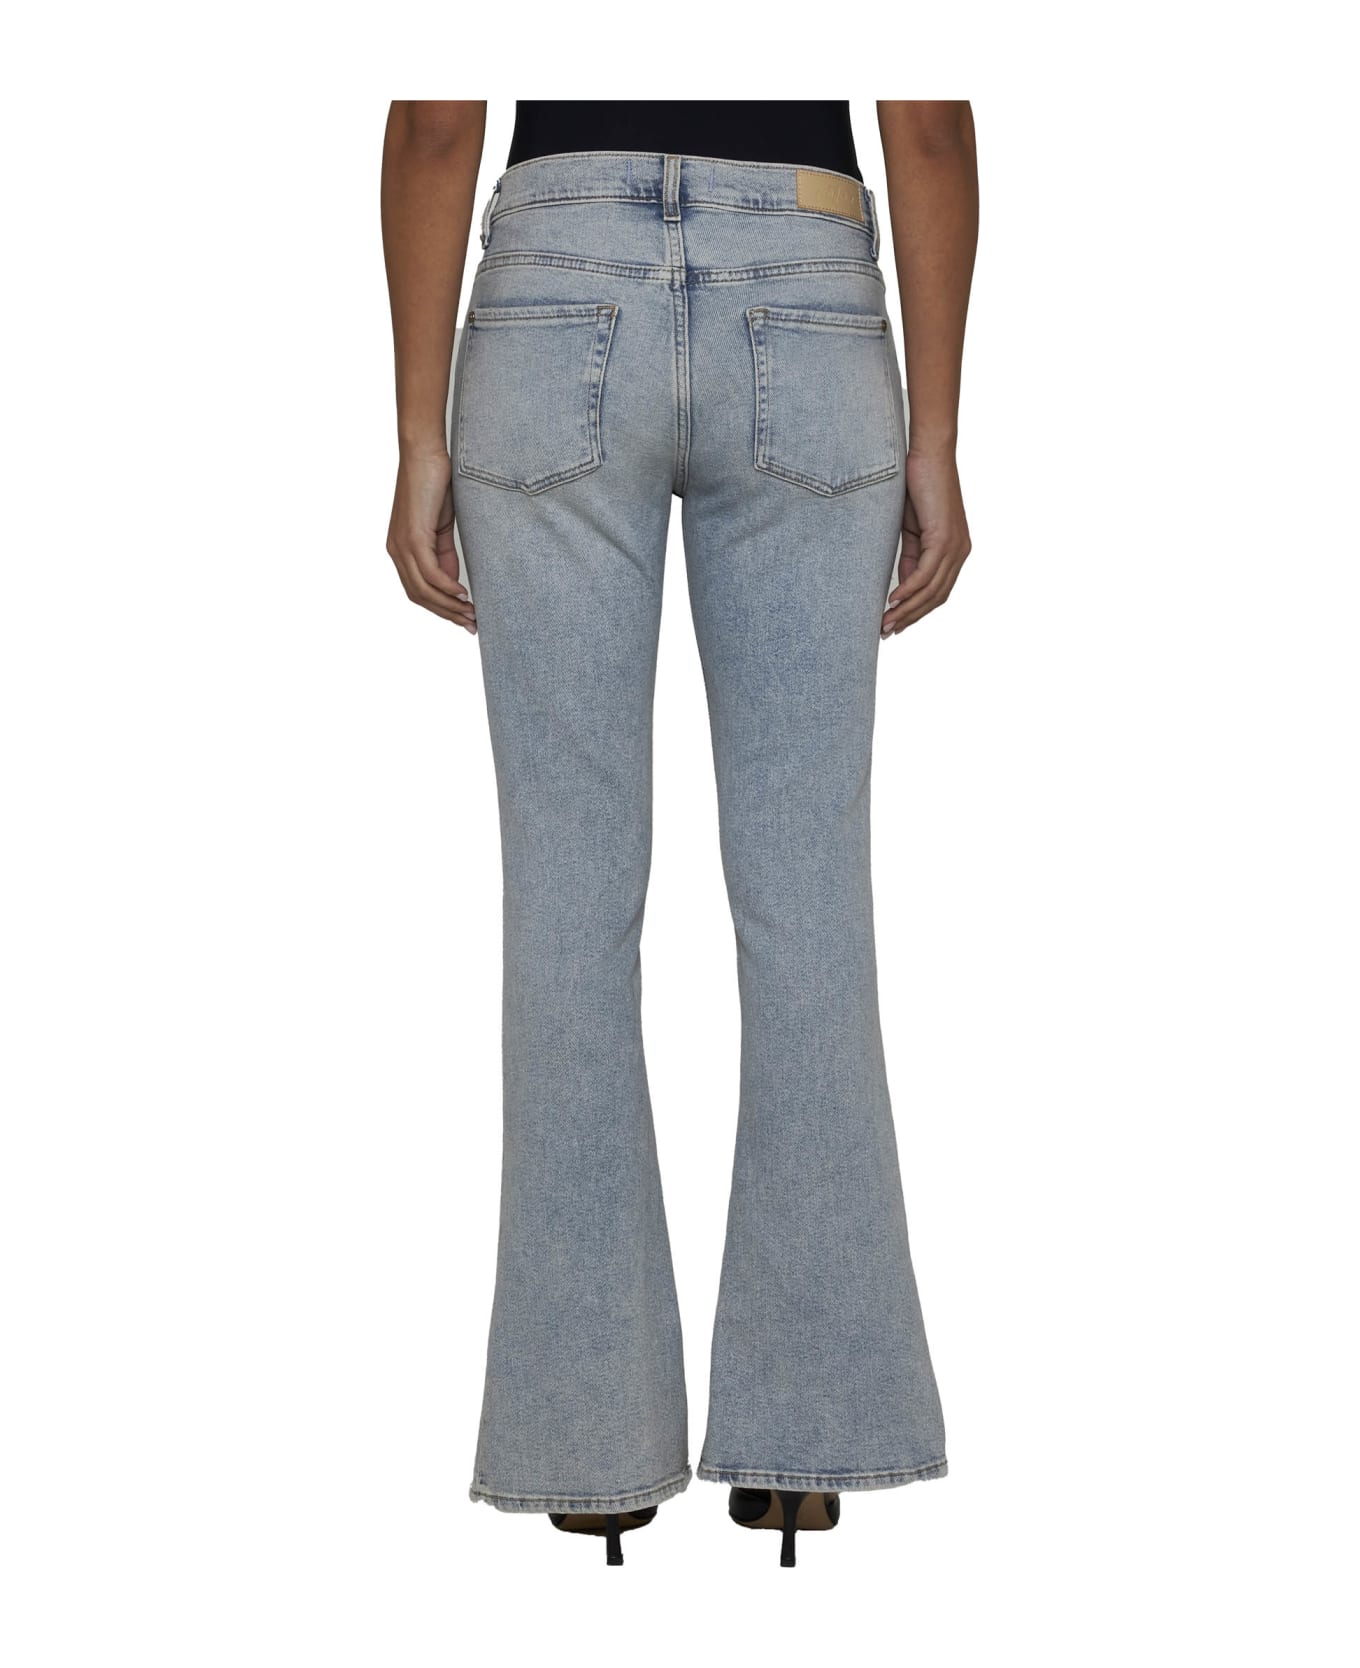 7 For All Mankind Jeans - Light blue